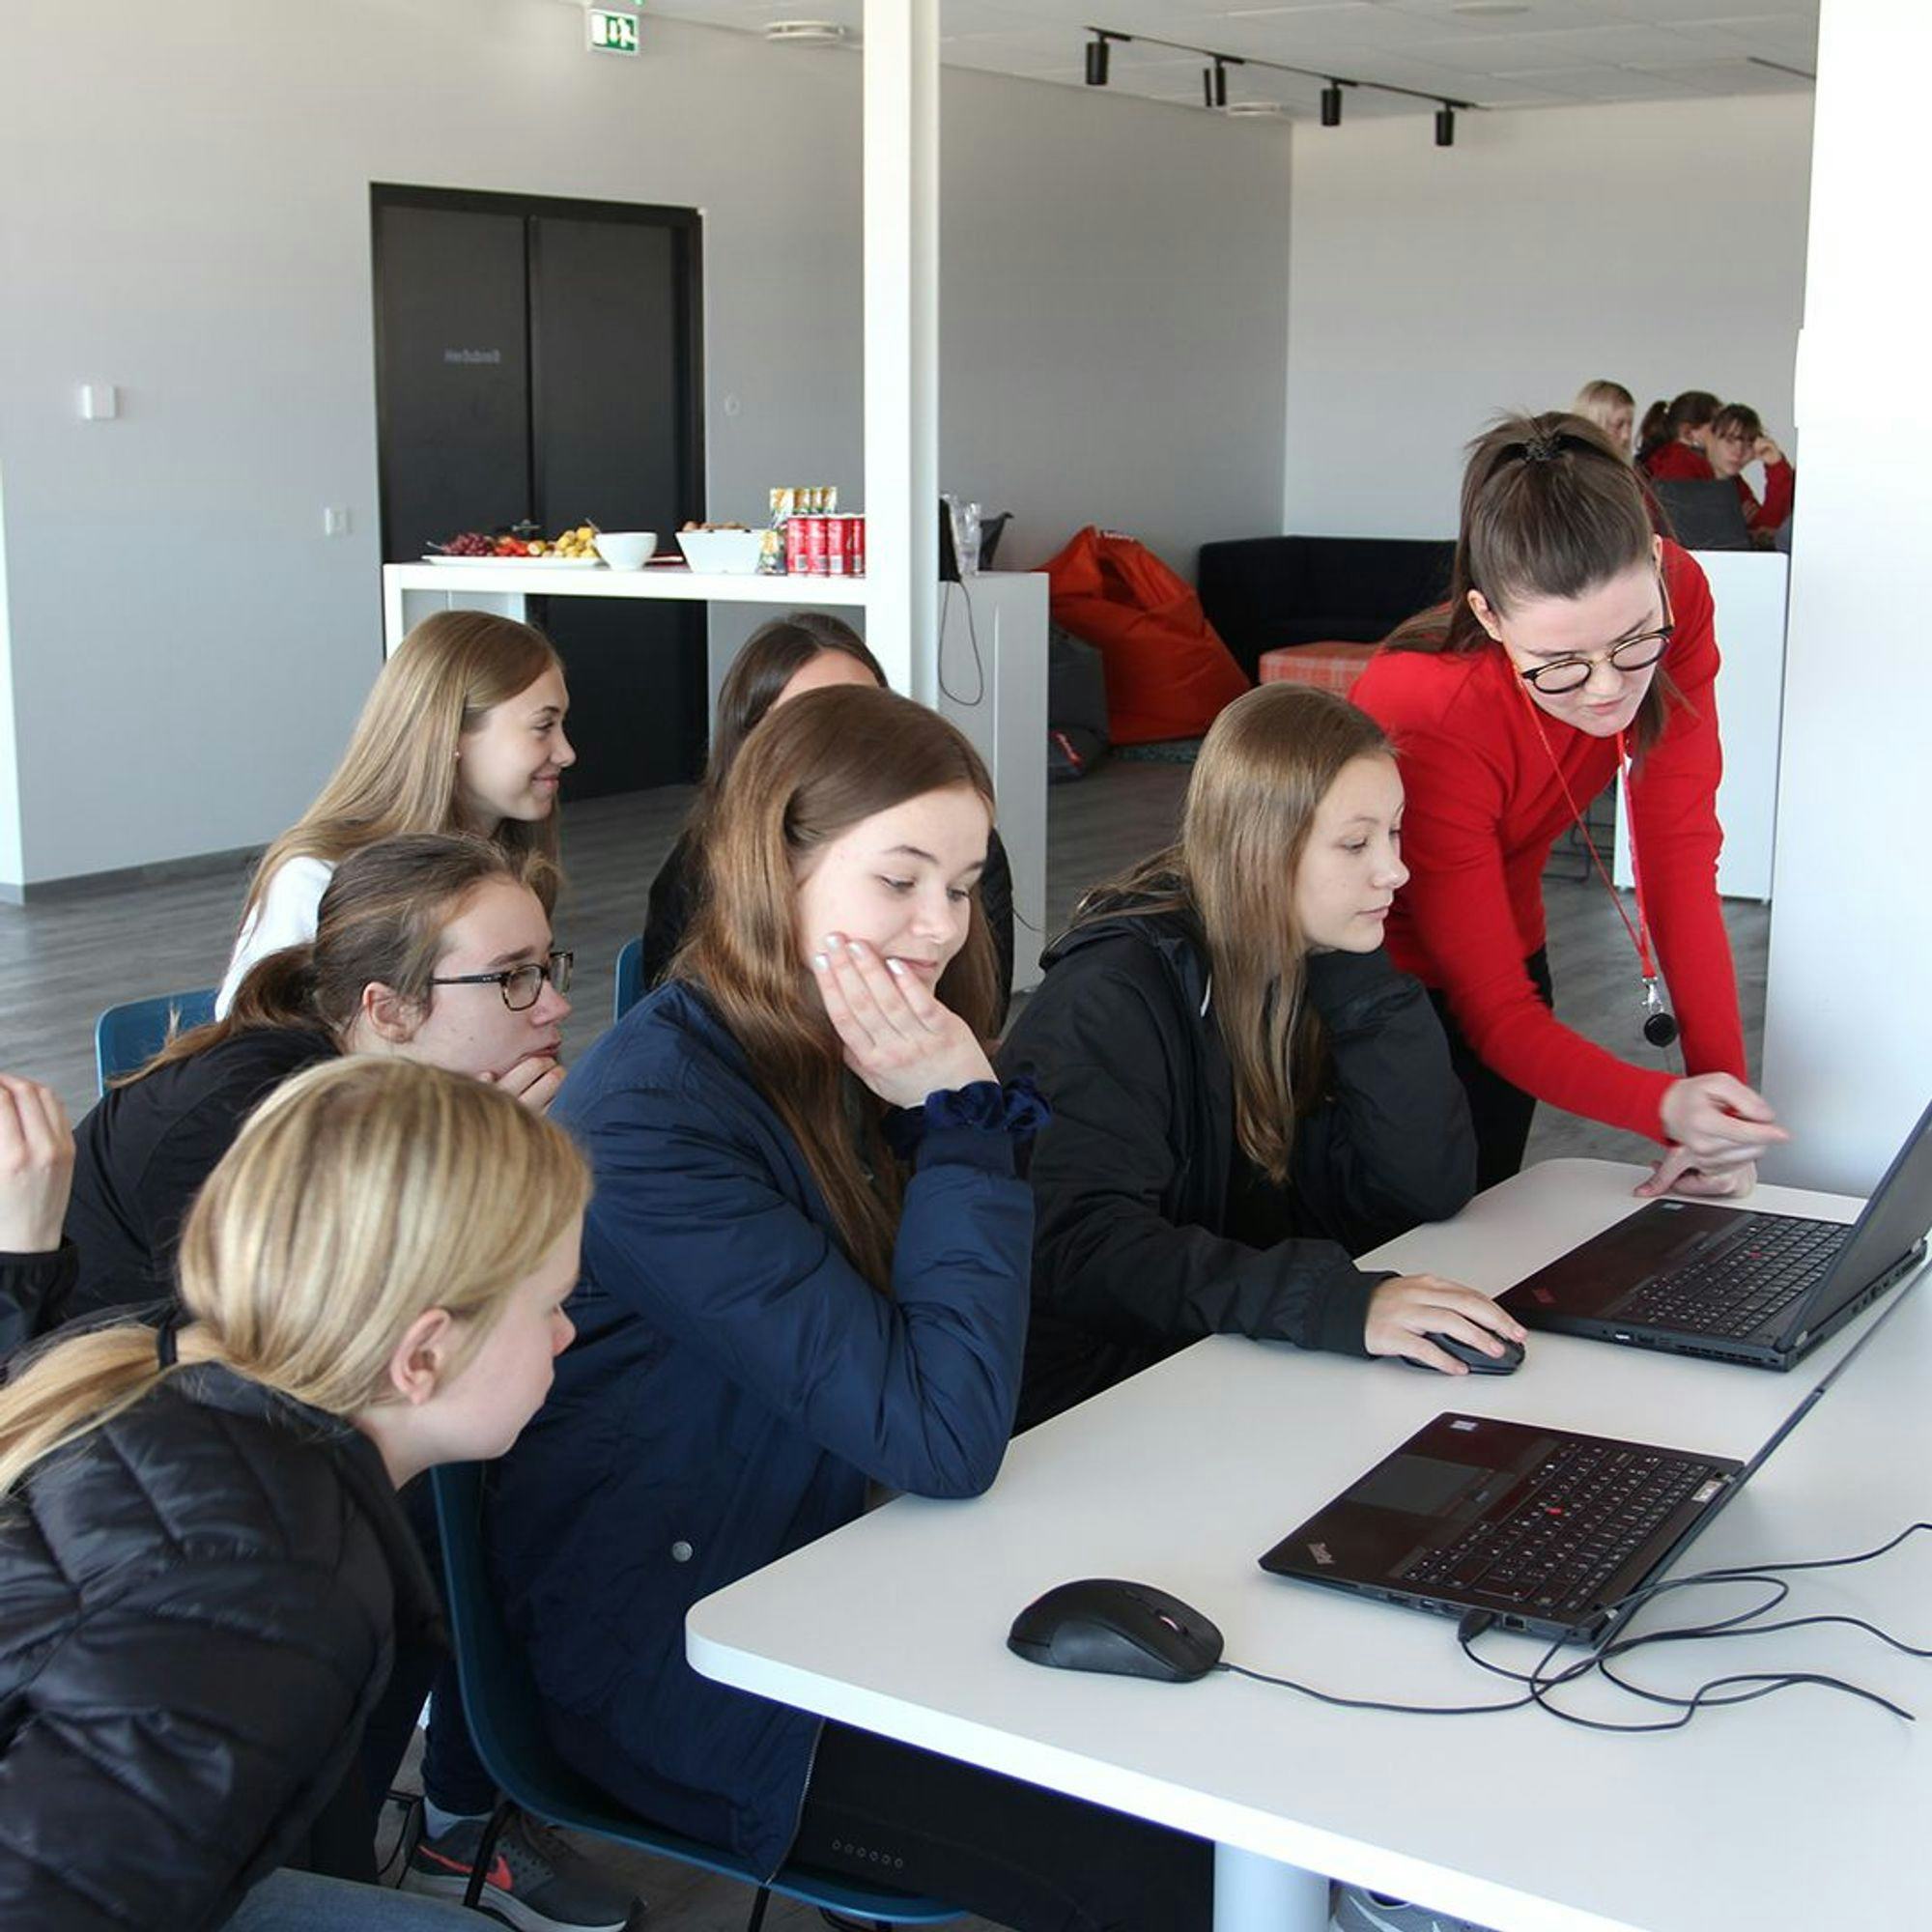 A woman giving instruction to six girls who are seated and looking at computer monitors